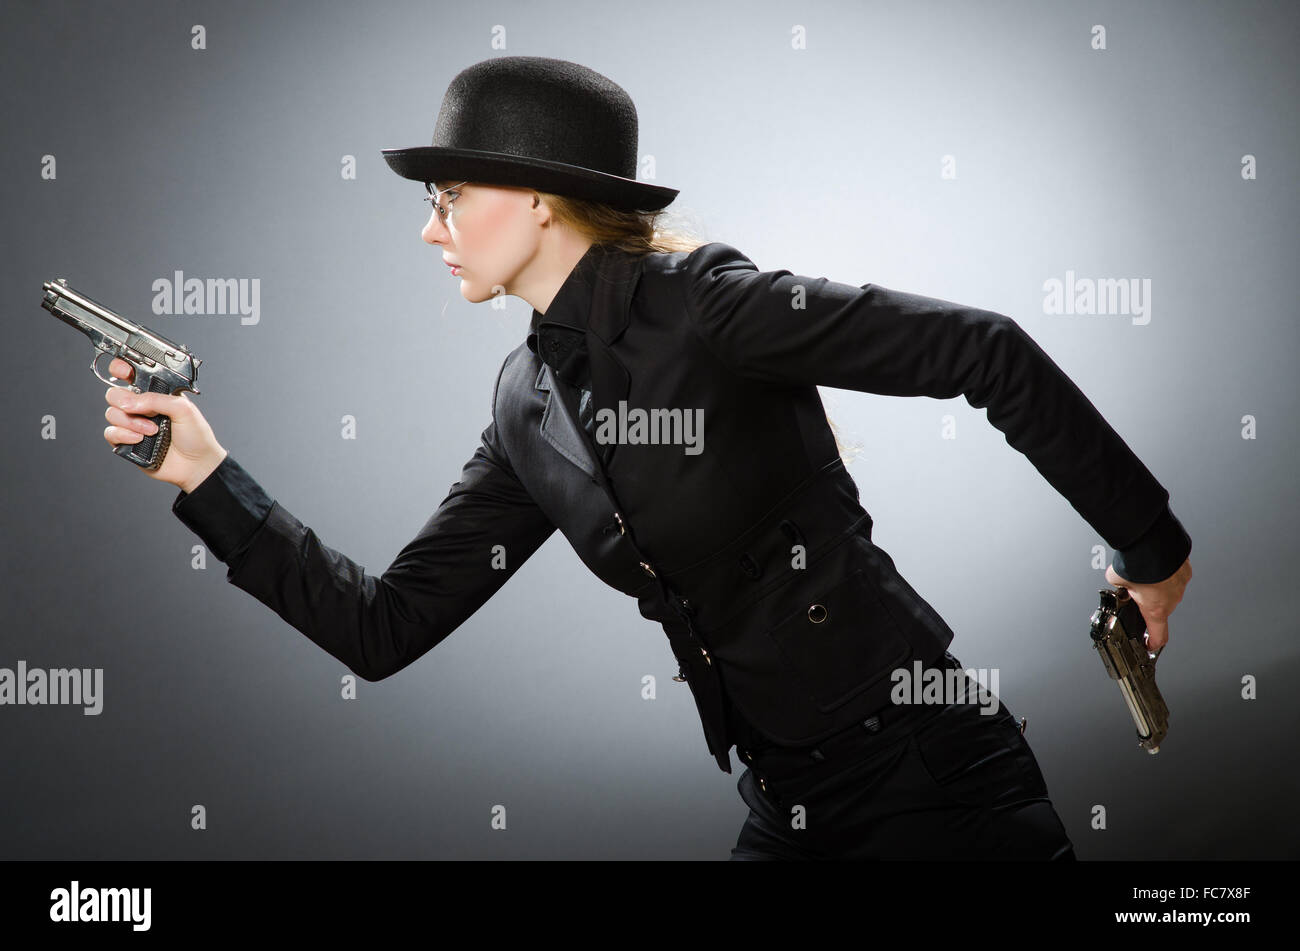 Female spy with weapon against gray Stock Photo